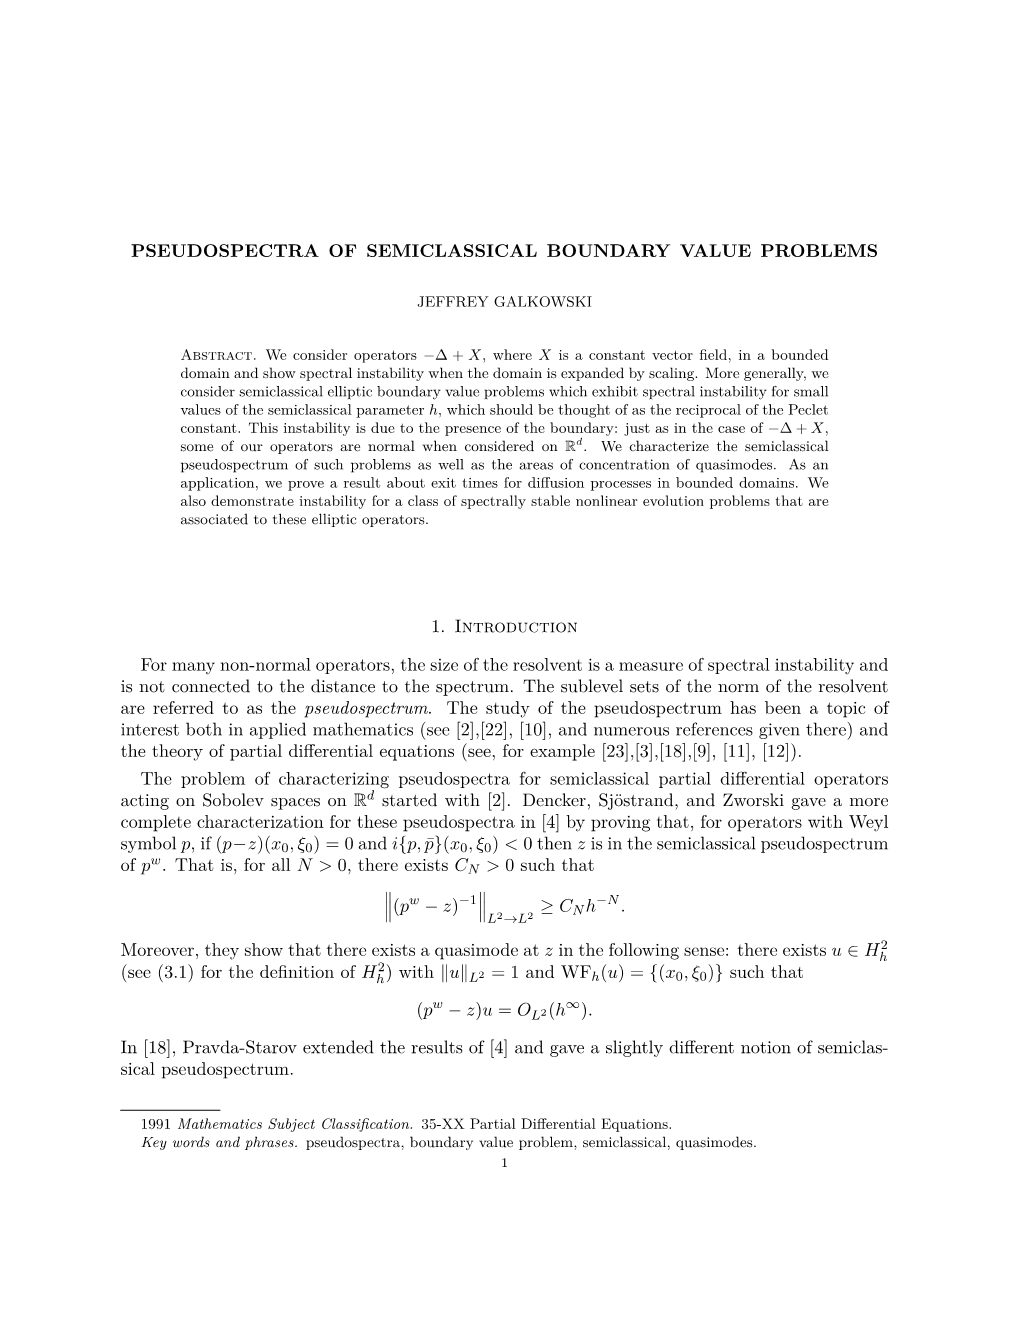 Pseudospectra of Semiclassical Boundary Value Problems